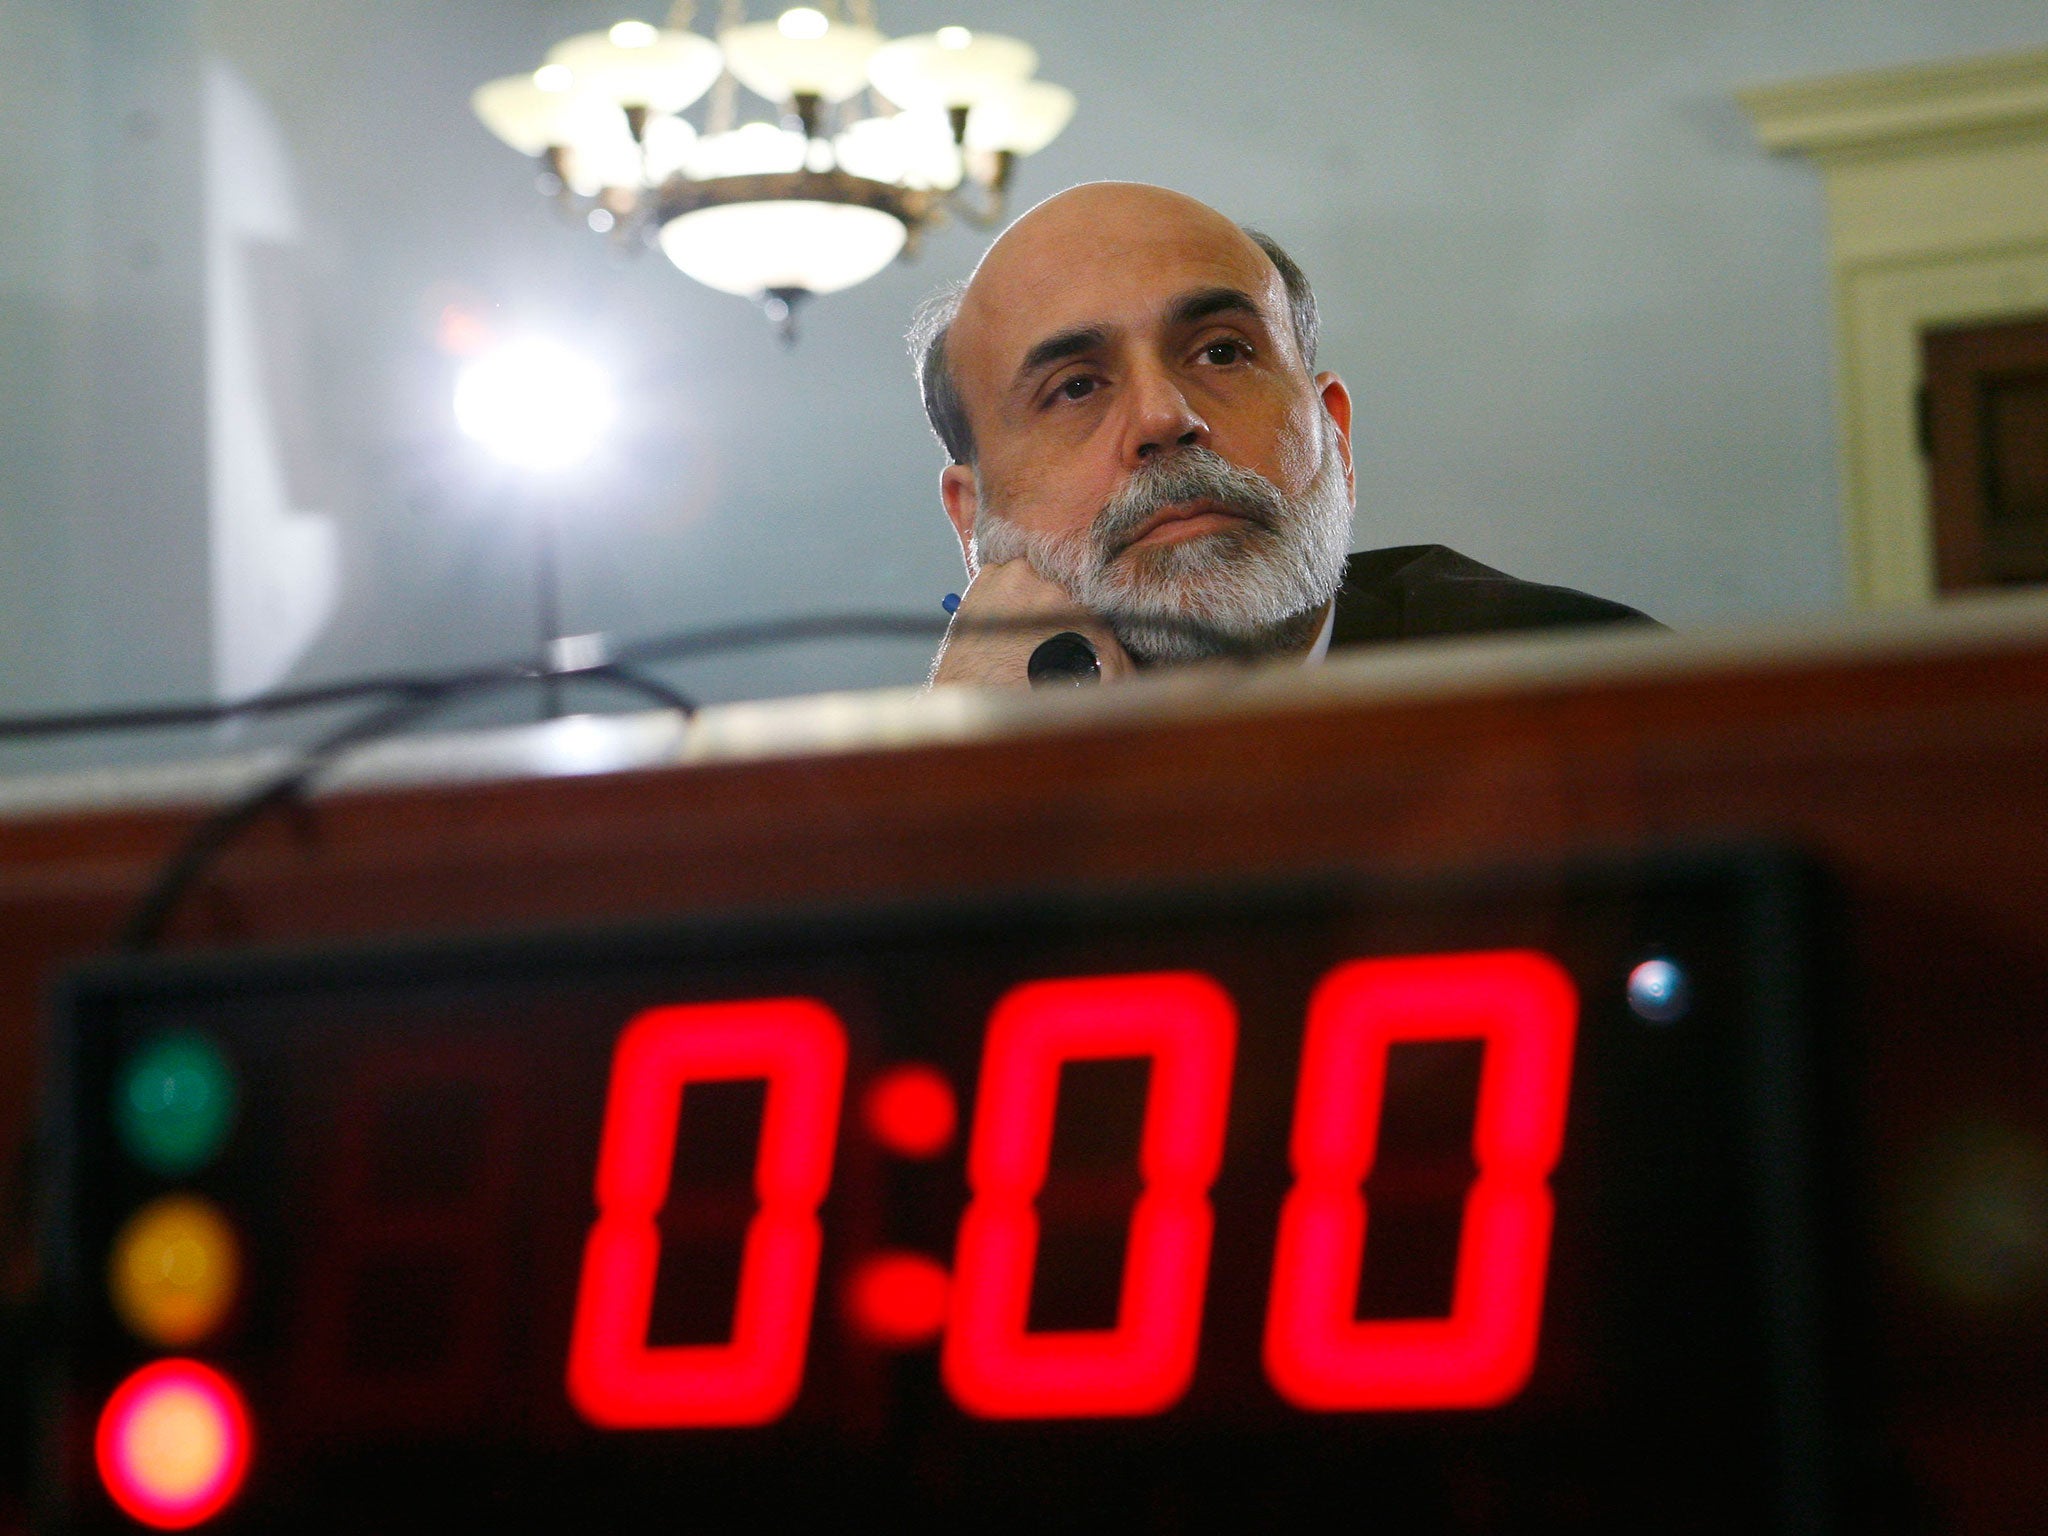 Ben Bernanke said deflation was usually caused by a collapse in demand